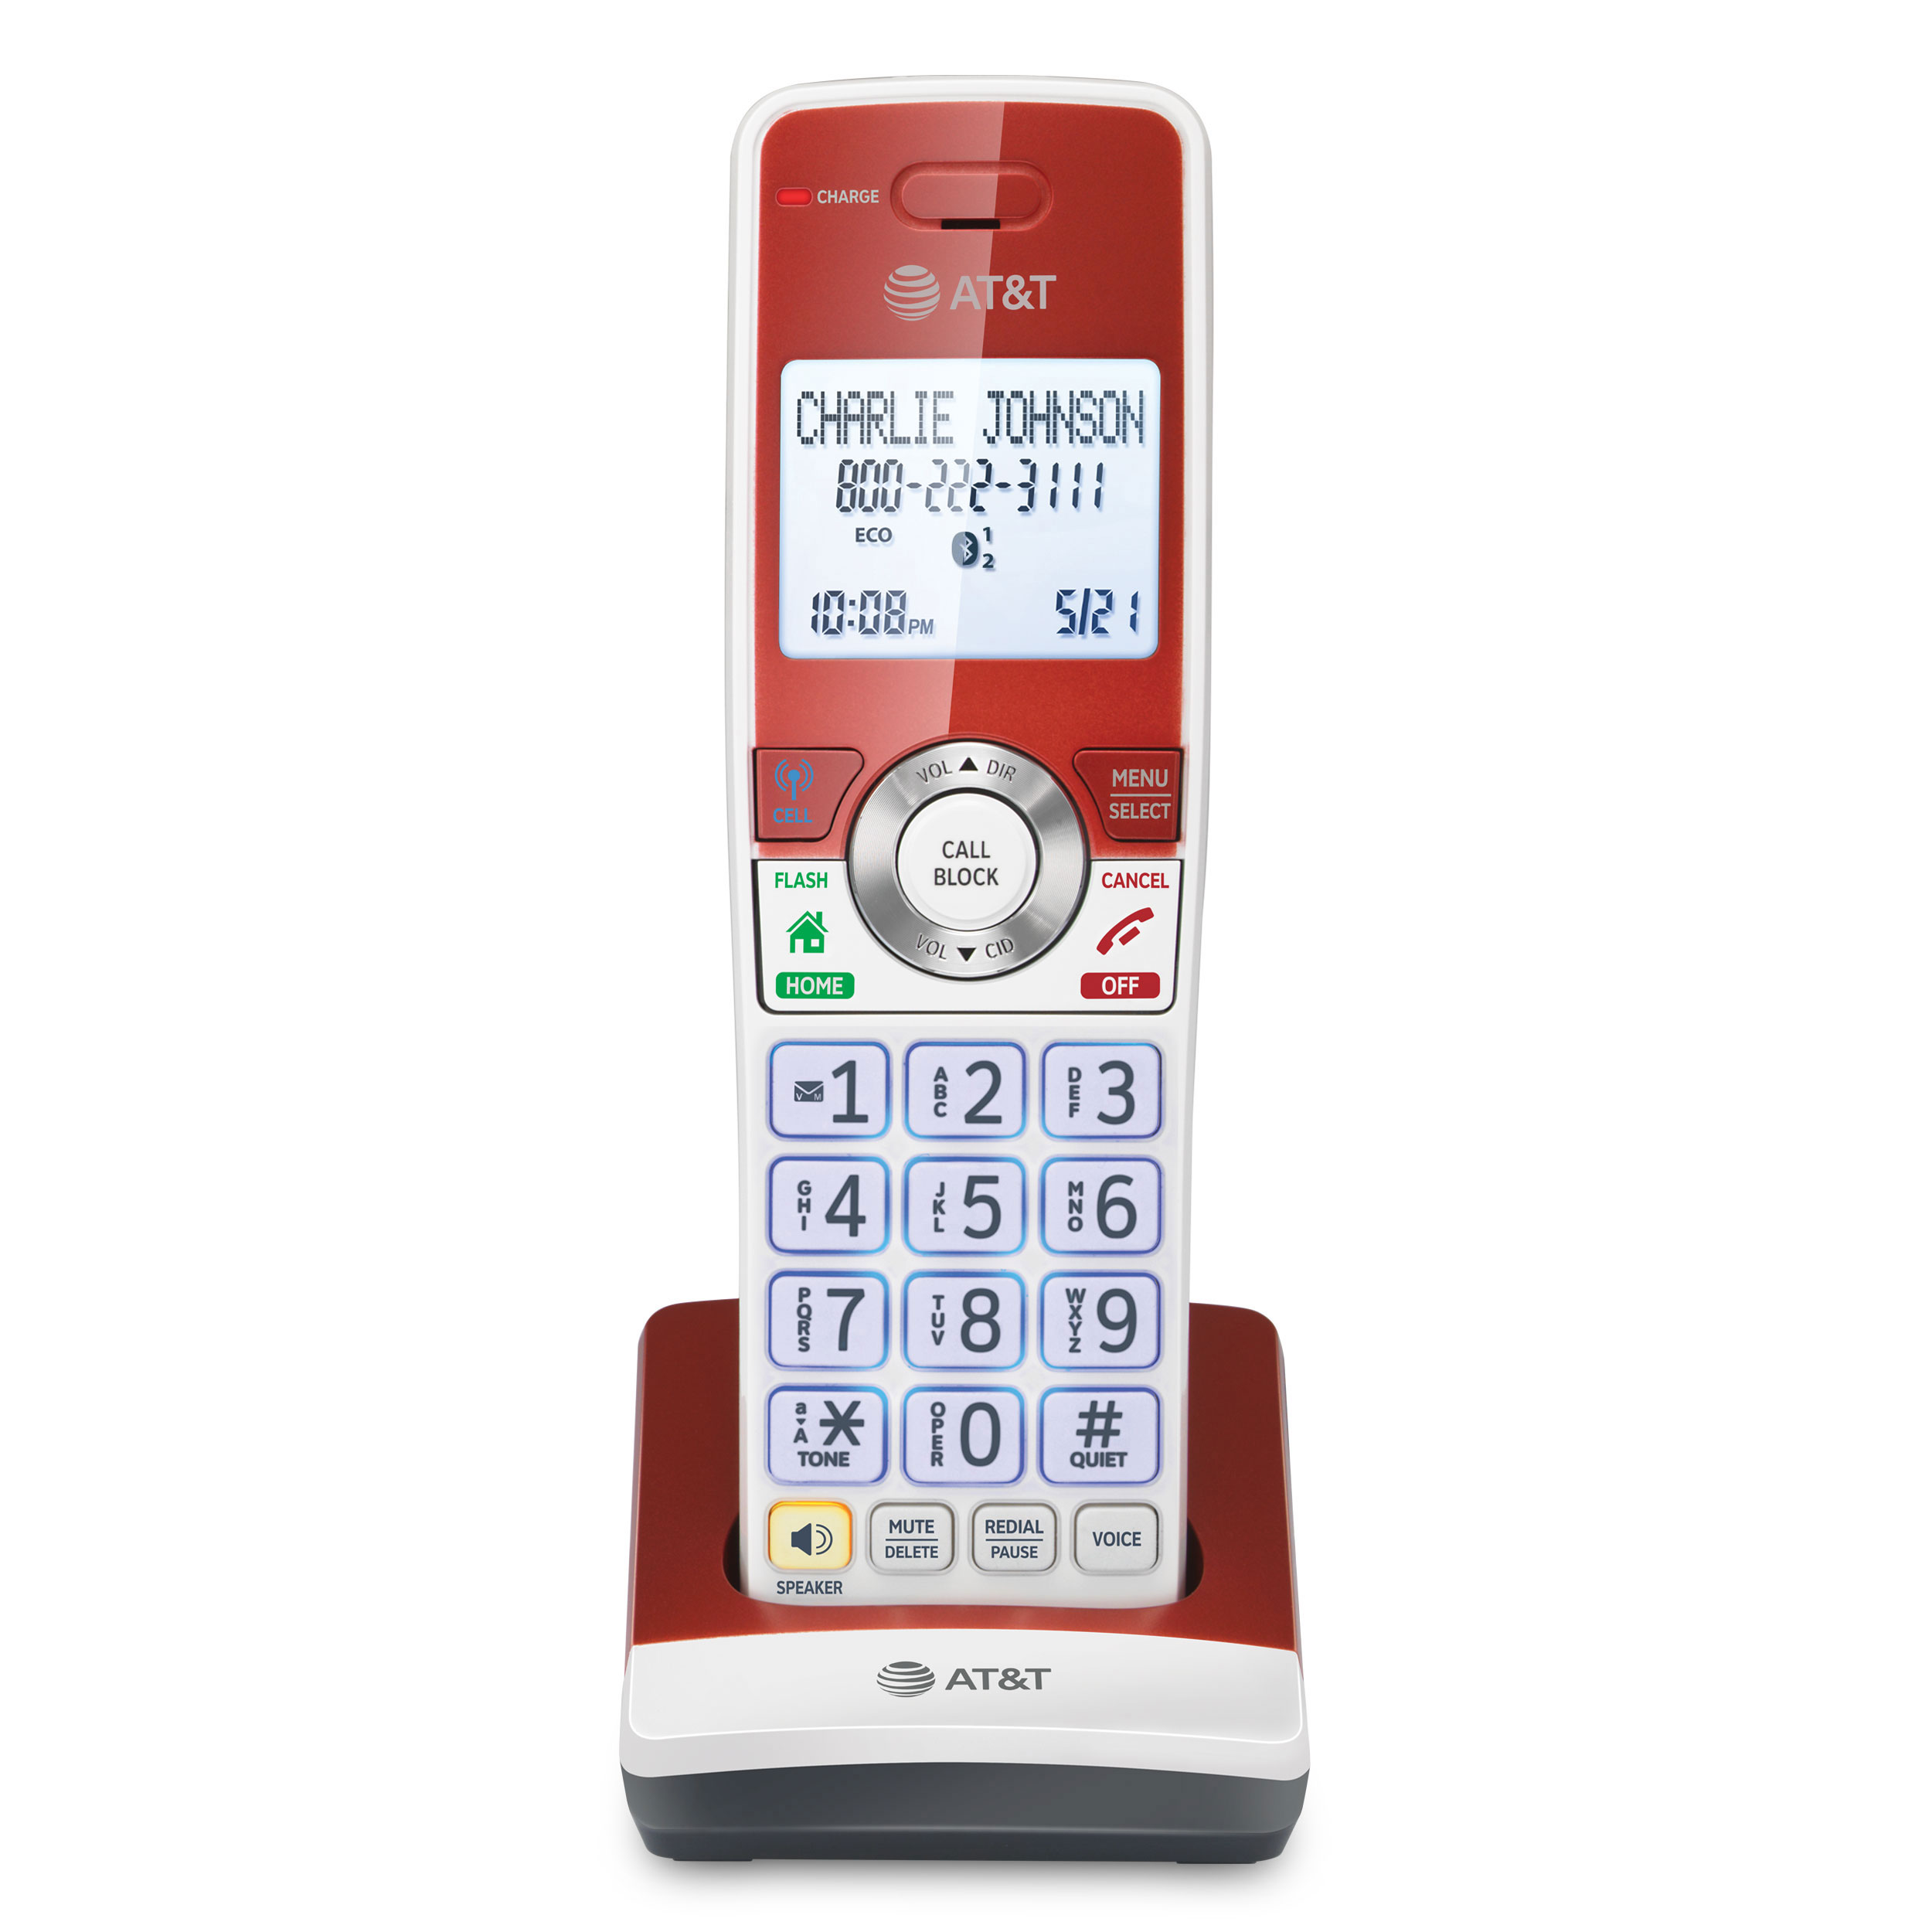 Accessory Handset with Unsurpassed Range, Bluetooth Connect to Cell, and Smart Call Blocker (Red) - view 1